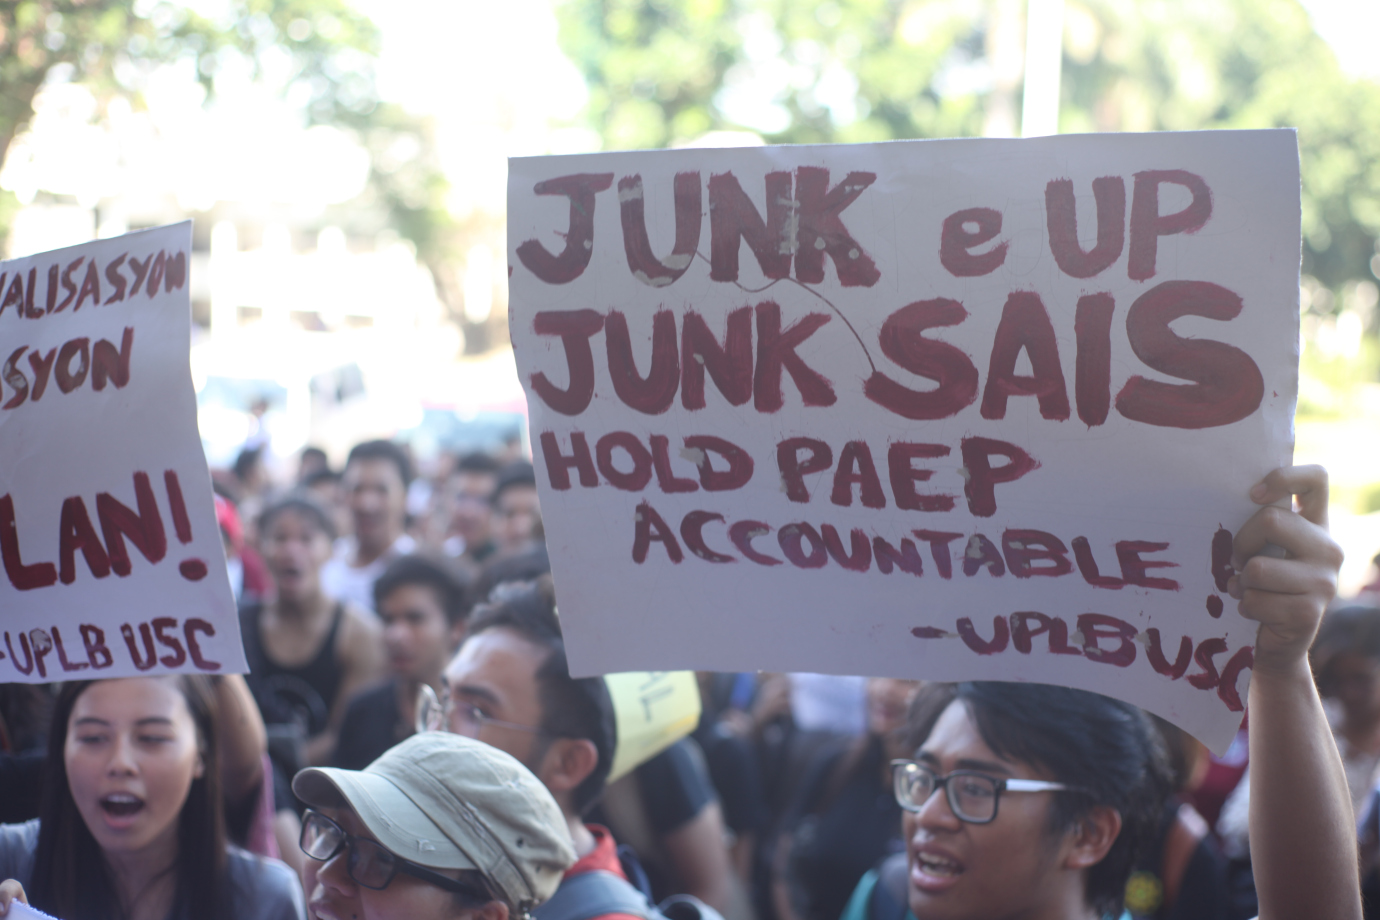 (Photo courtesy of UPLB Perspective)